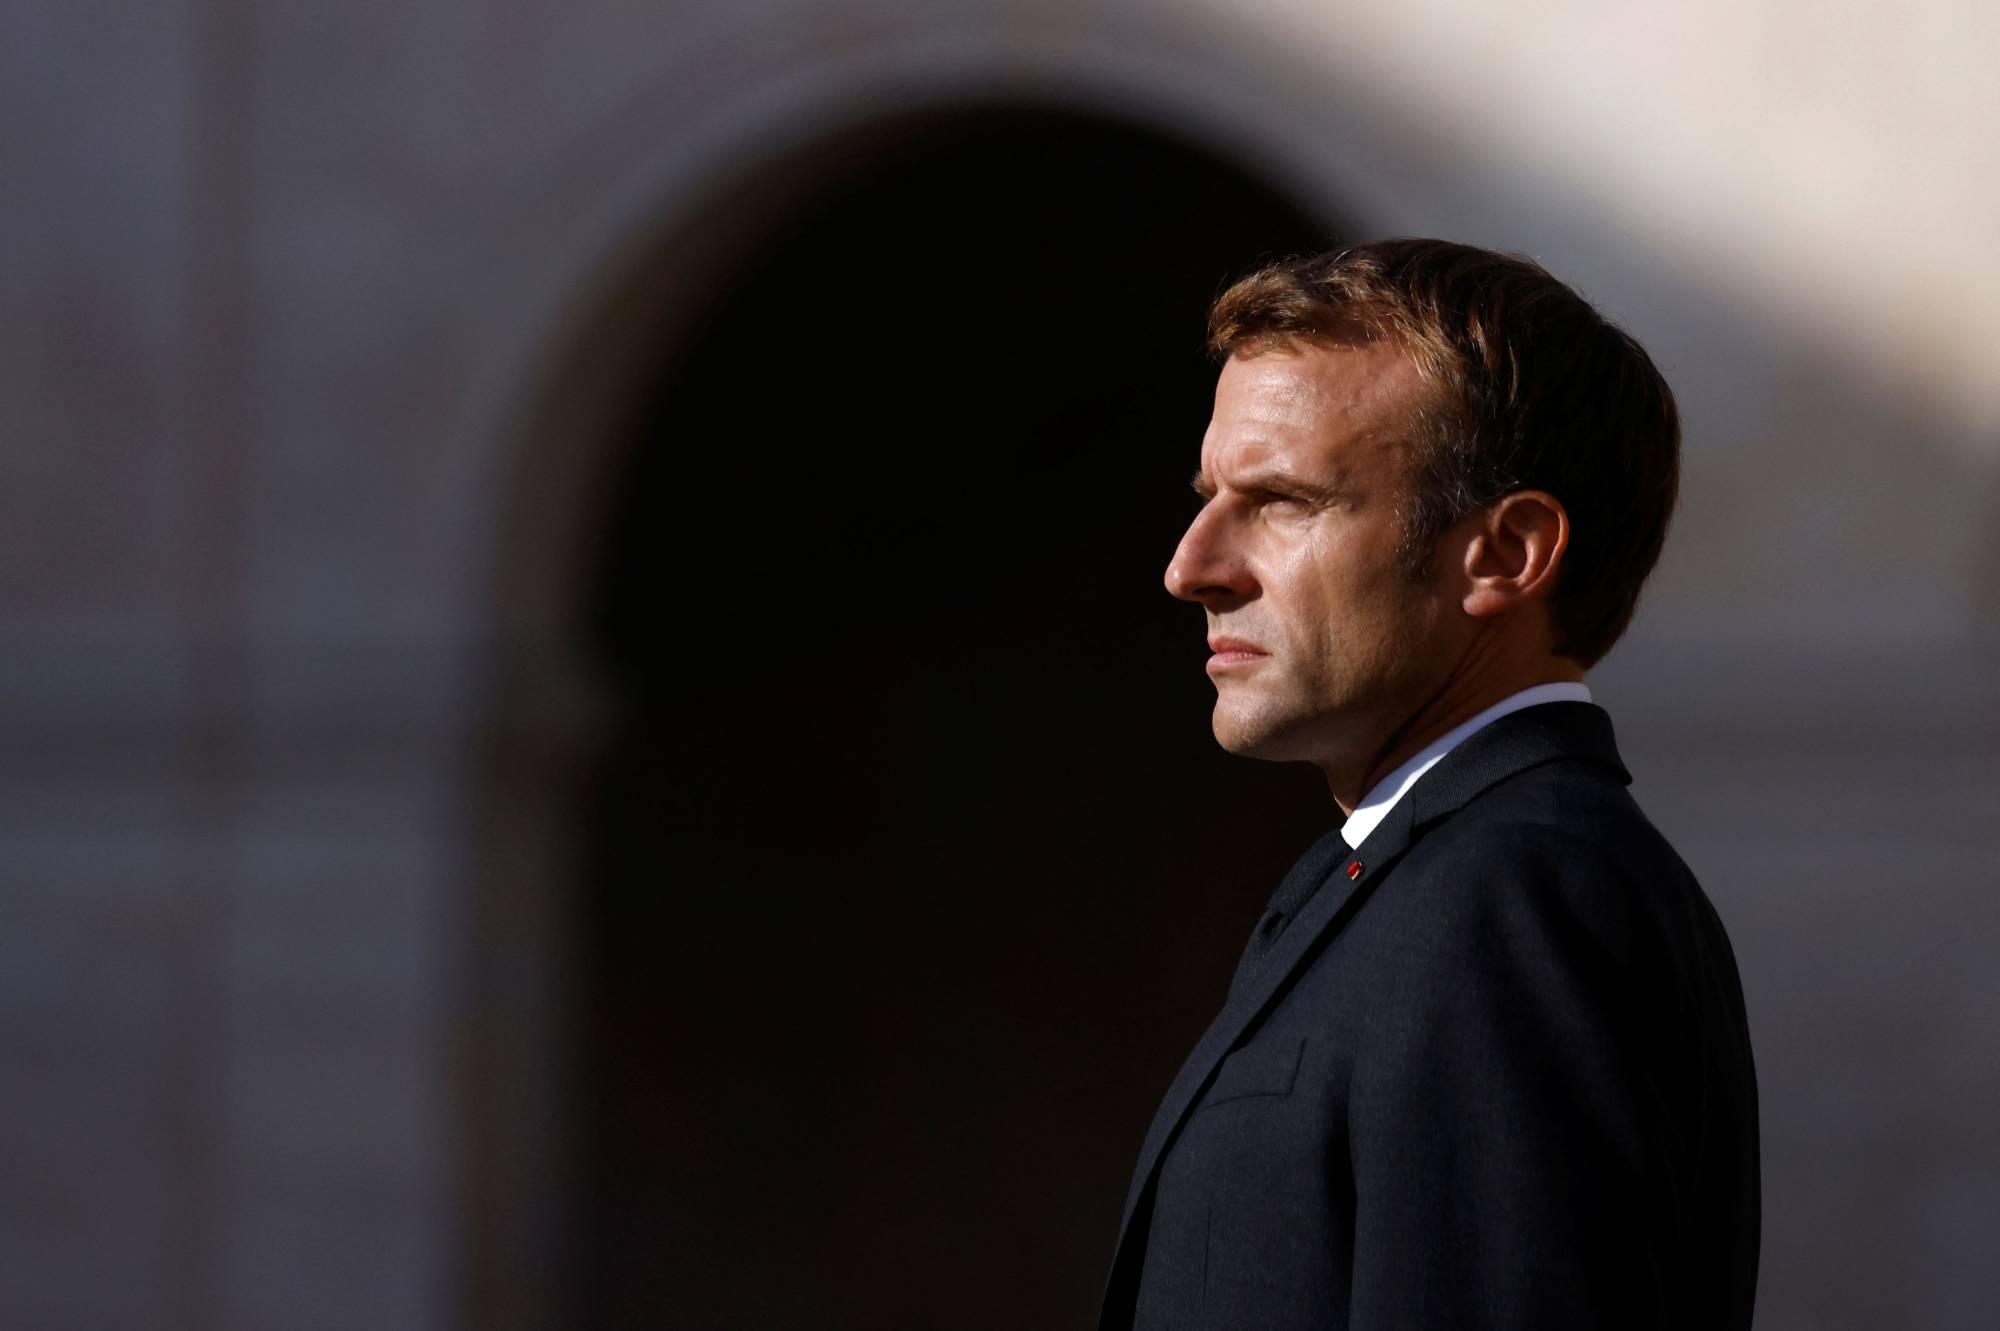 France’s ambition to lead Europe